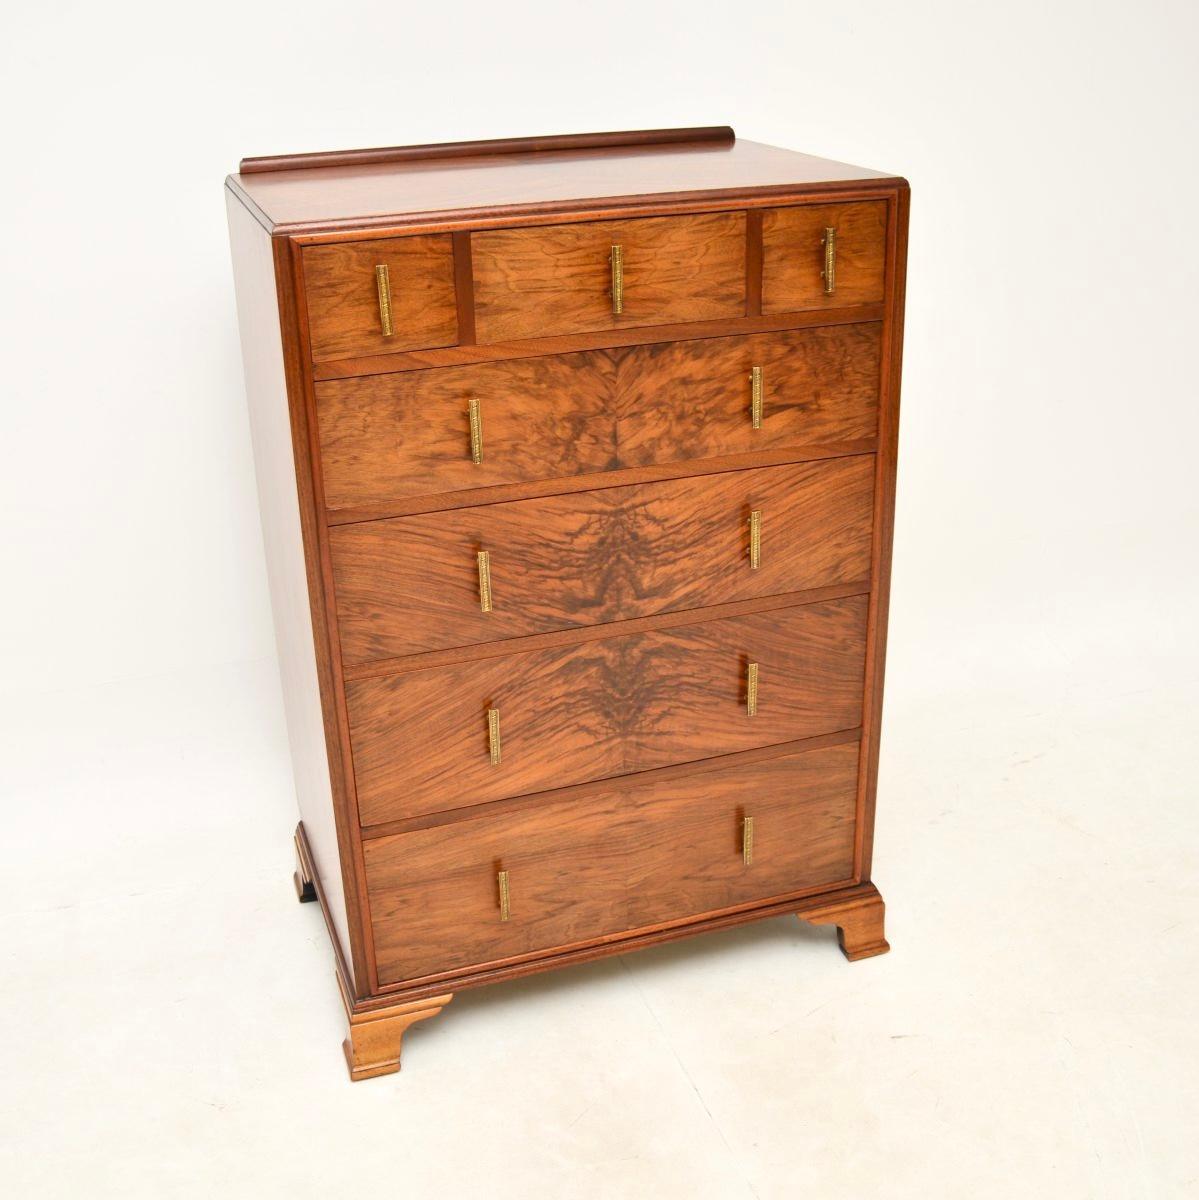 A stunning Art Deco burr walnut chest of drawers, this was made in England and dates from around the 1920-30’s.

It is a great size and is of superb quality. There is lots of storage inside the generous drawers, this sits on bracket feet and has a